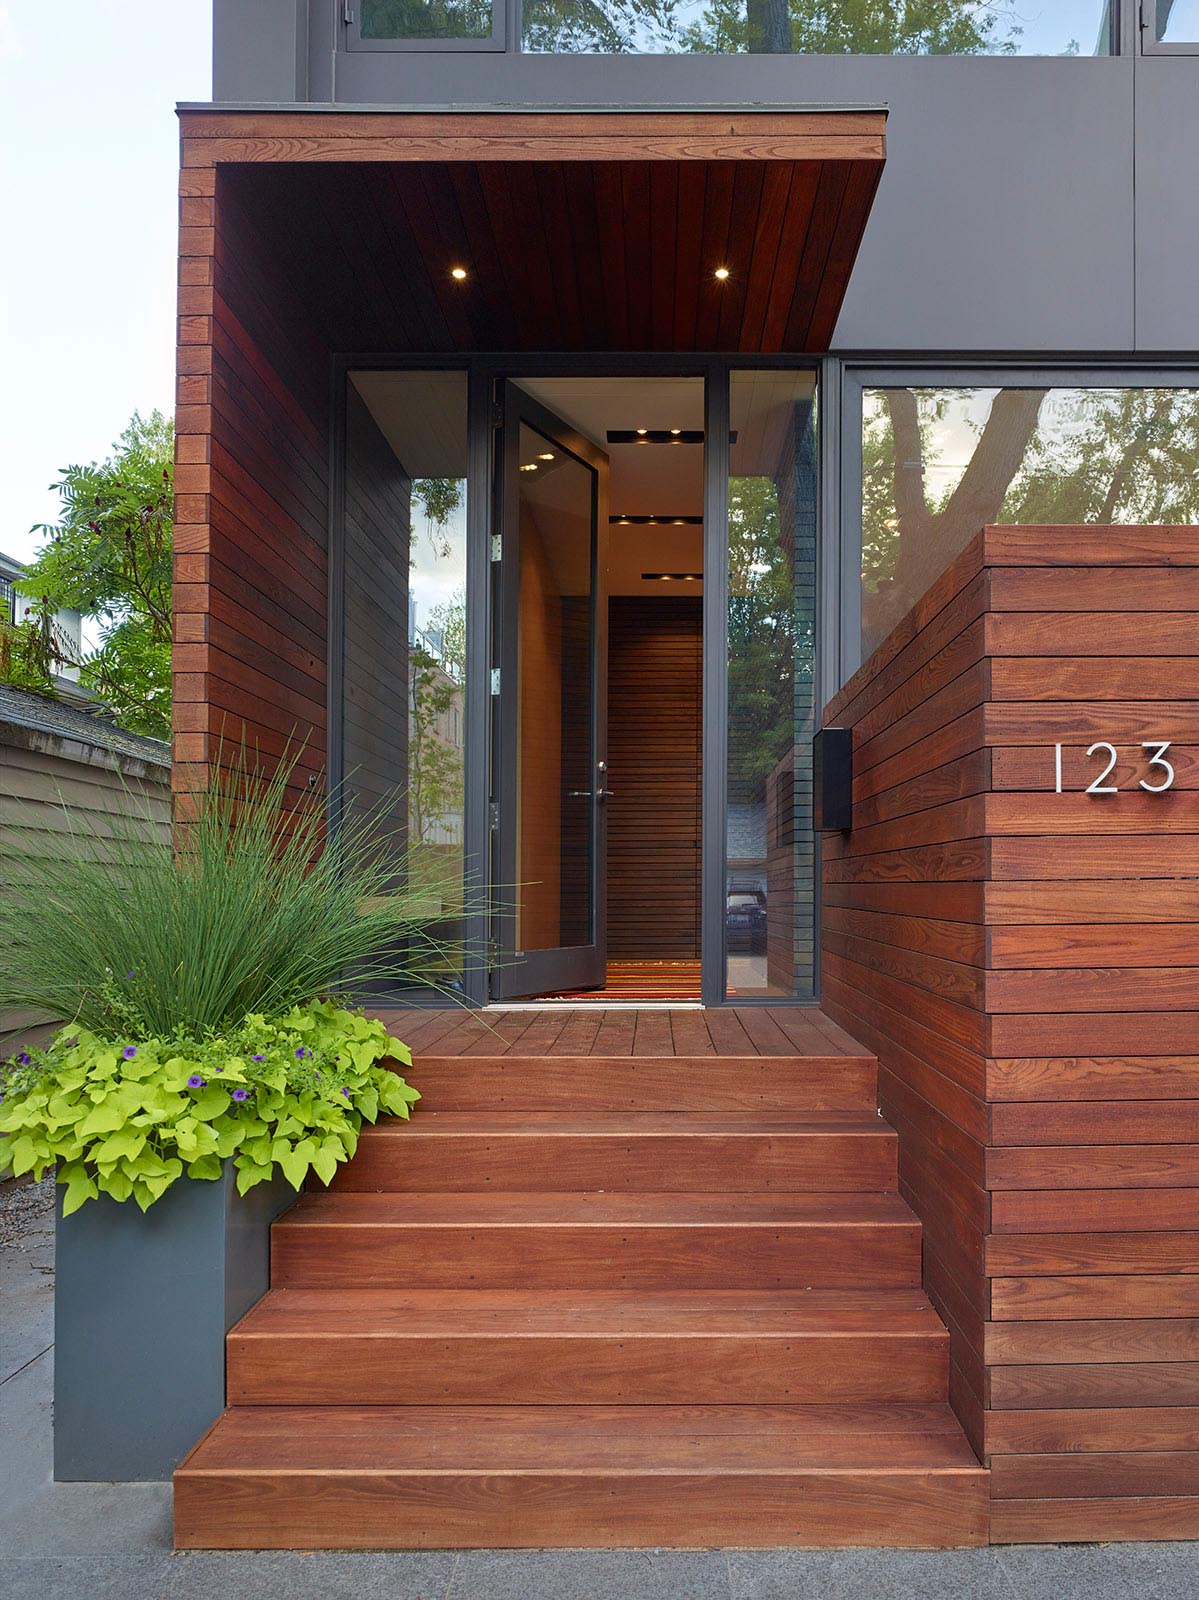 The porch beside the front door acts as a private outdoor dining room enclosed by a five-foot-high wood screen, extending the private realm into the public arena.